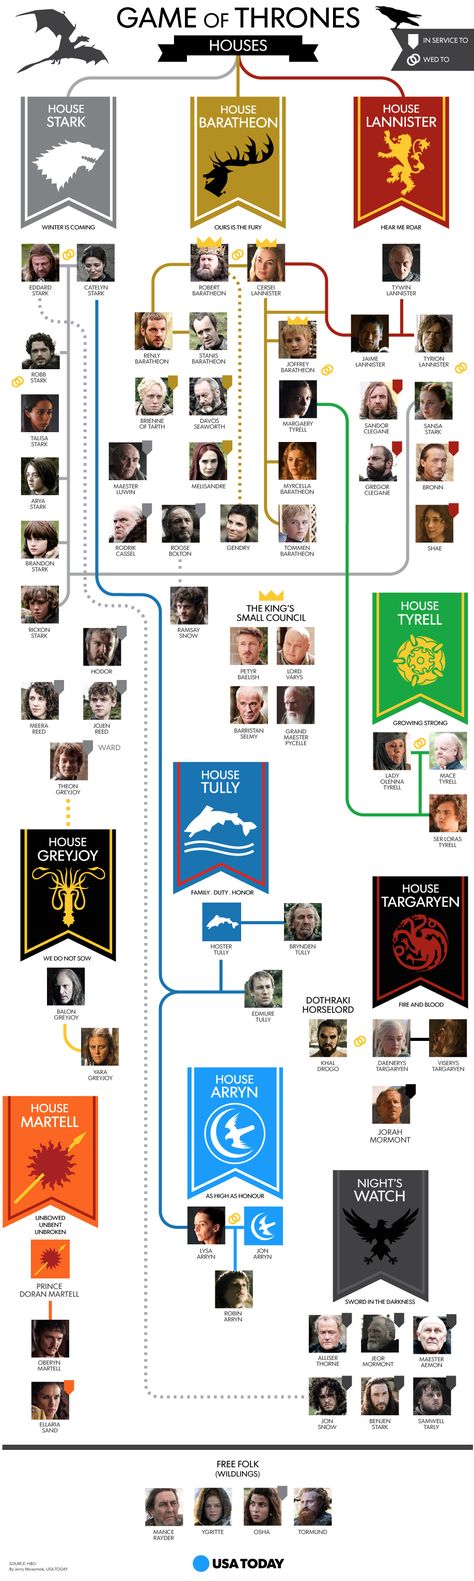 Fandom, Game Of Thrones, Game Of Thrones Houses, Game Of Thrones 3, Game Of Thrones Characters, Game Of Thrones Tree, Games Of Thrones, Got Game Of Thrones, Game Of Thones